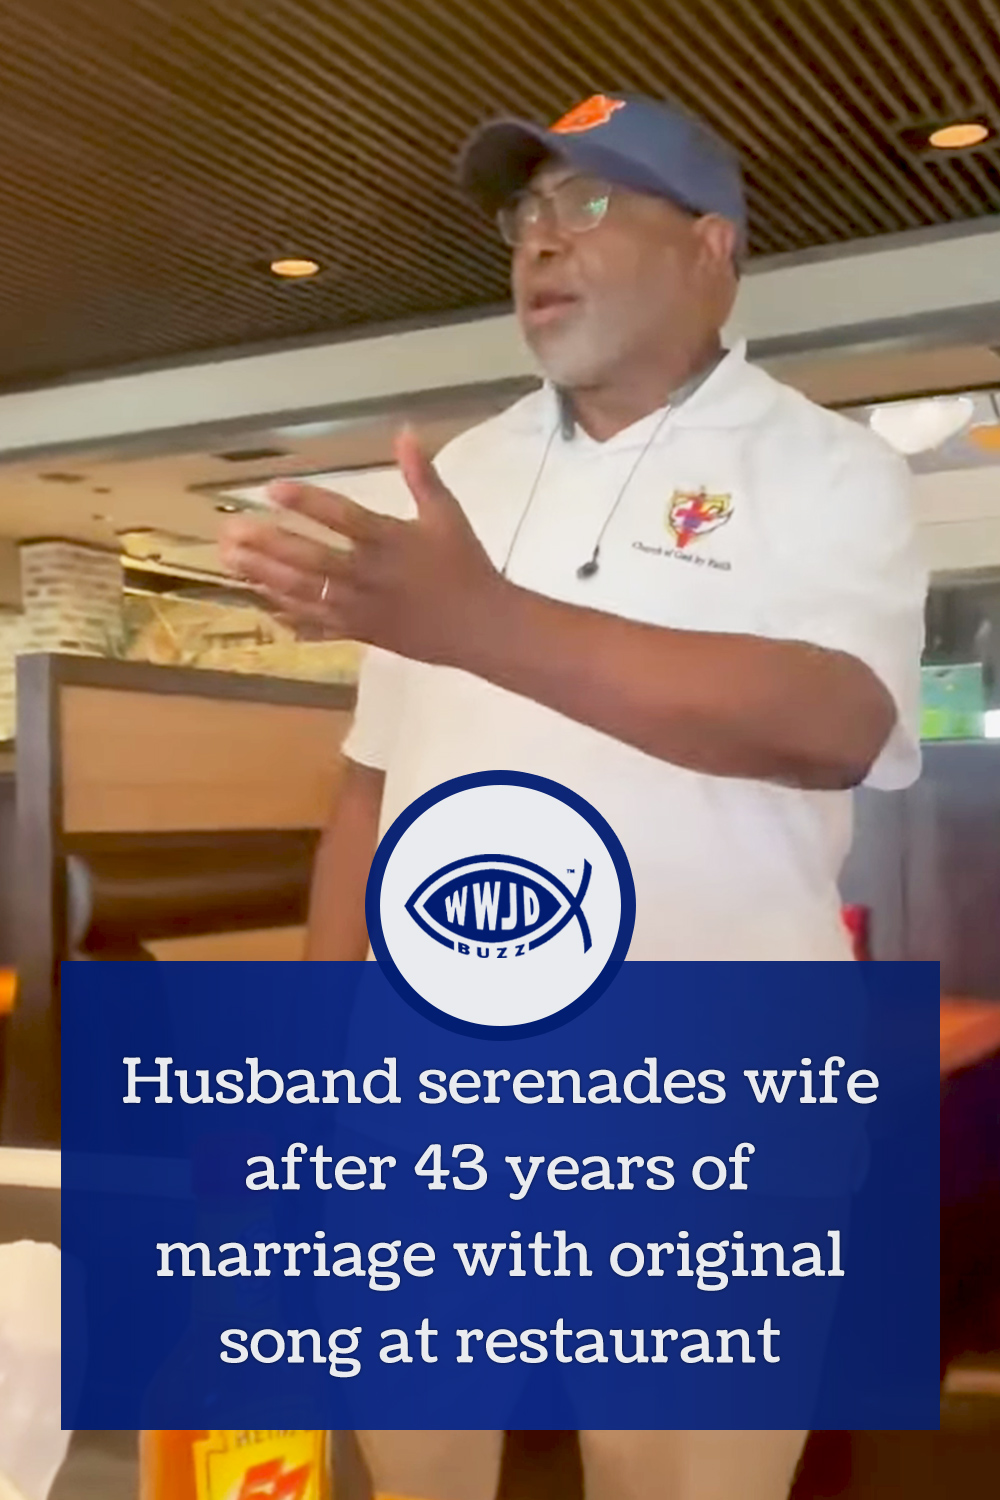 Husband serenades wife after 43 years of marriage with original song at restaurant